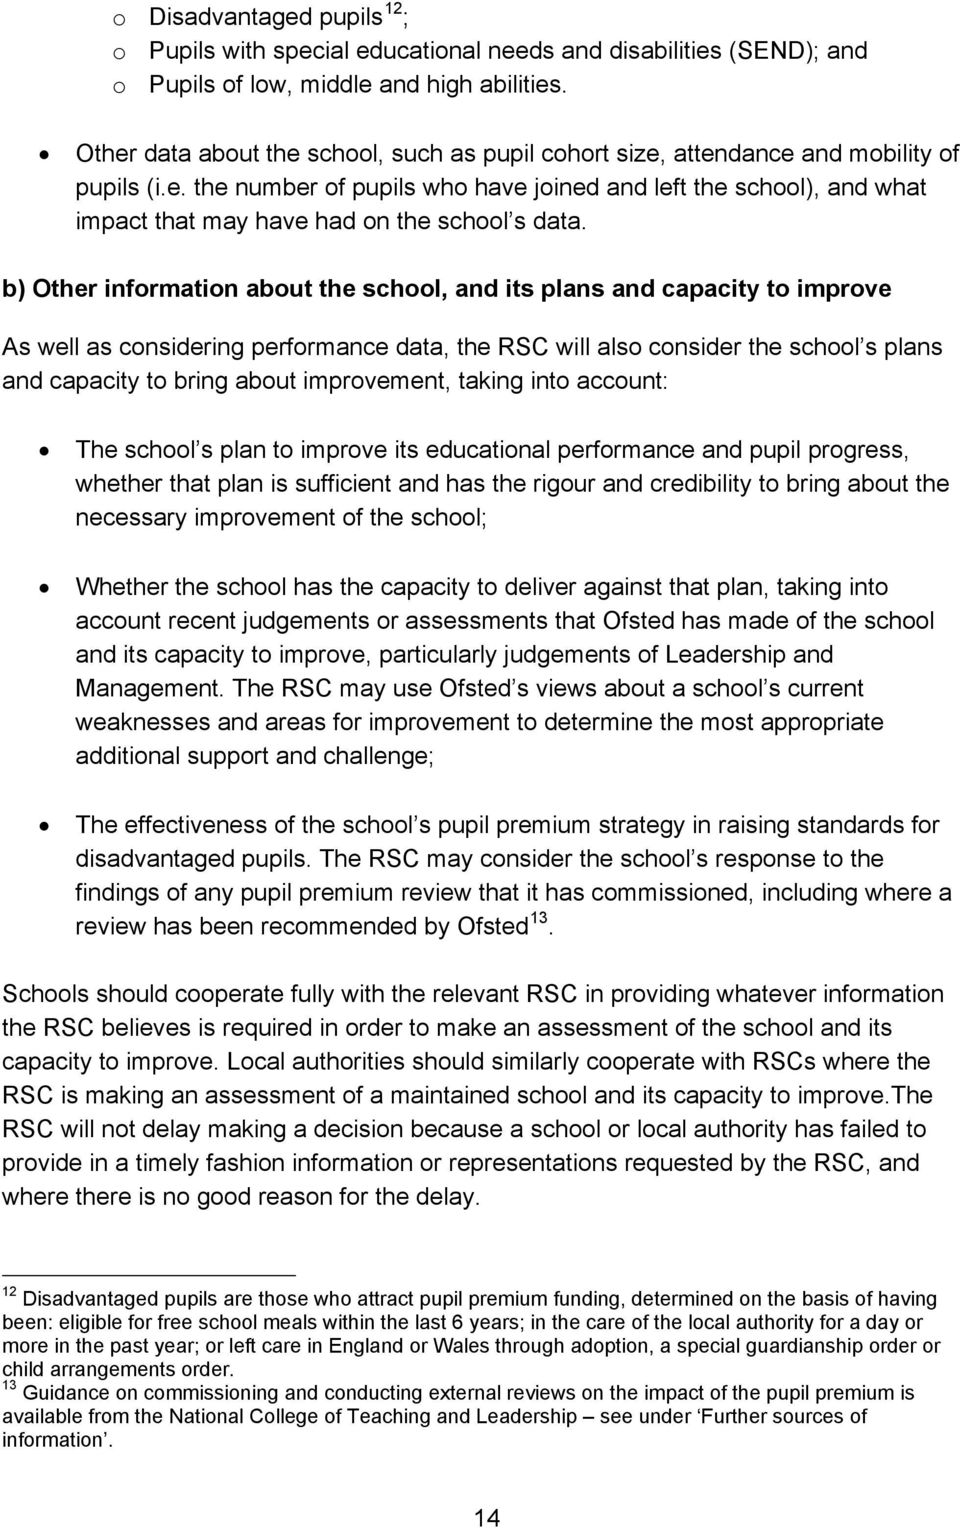 b) Other information about the school, and its plans and capacity to improve As well as considering performance data, the RSC will also consider the school s plans and capacity to bring about